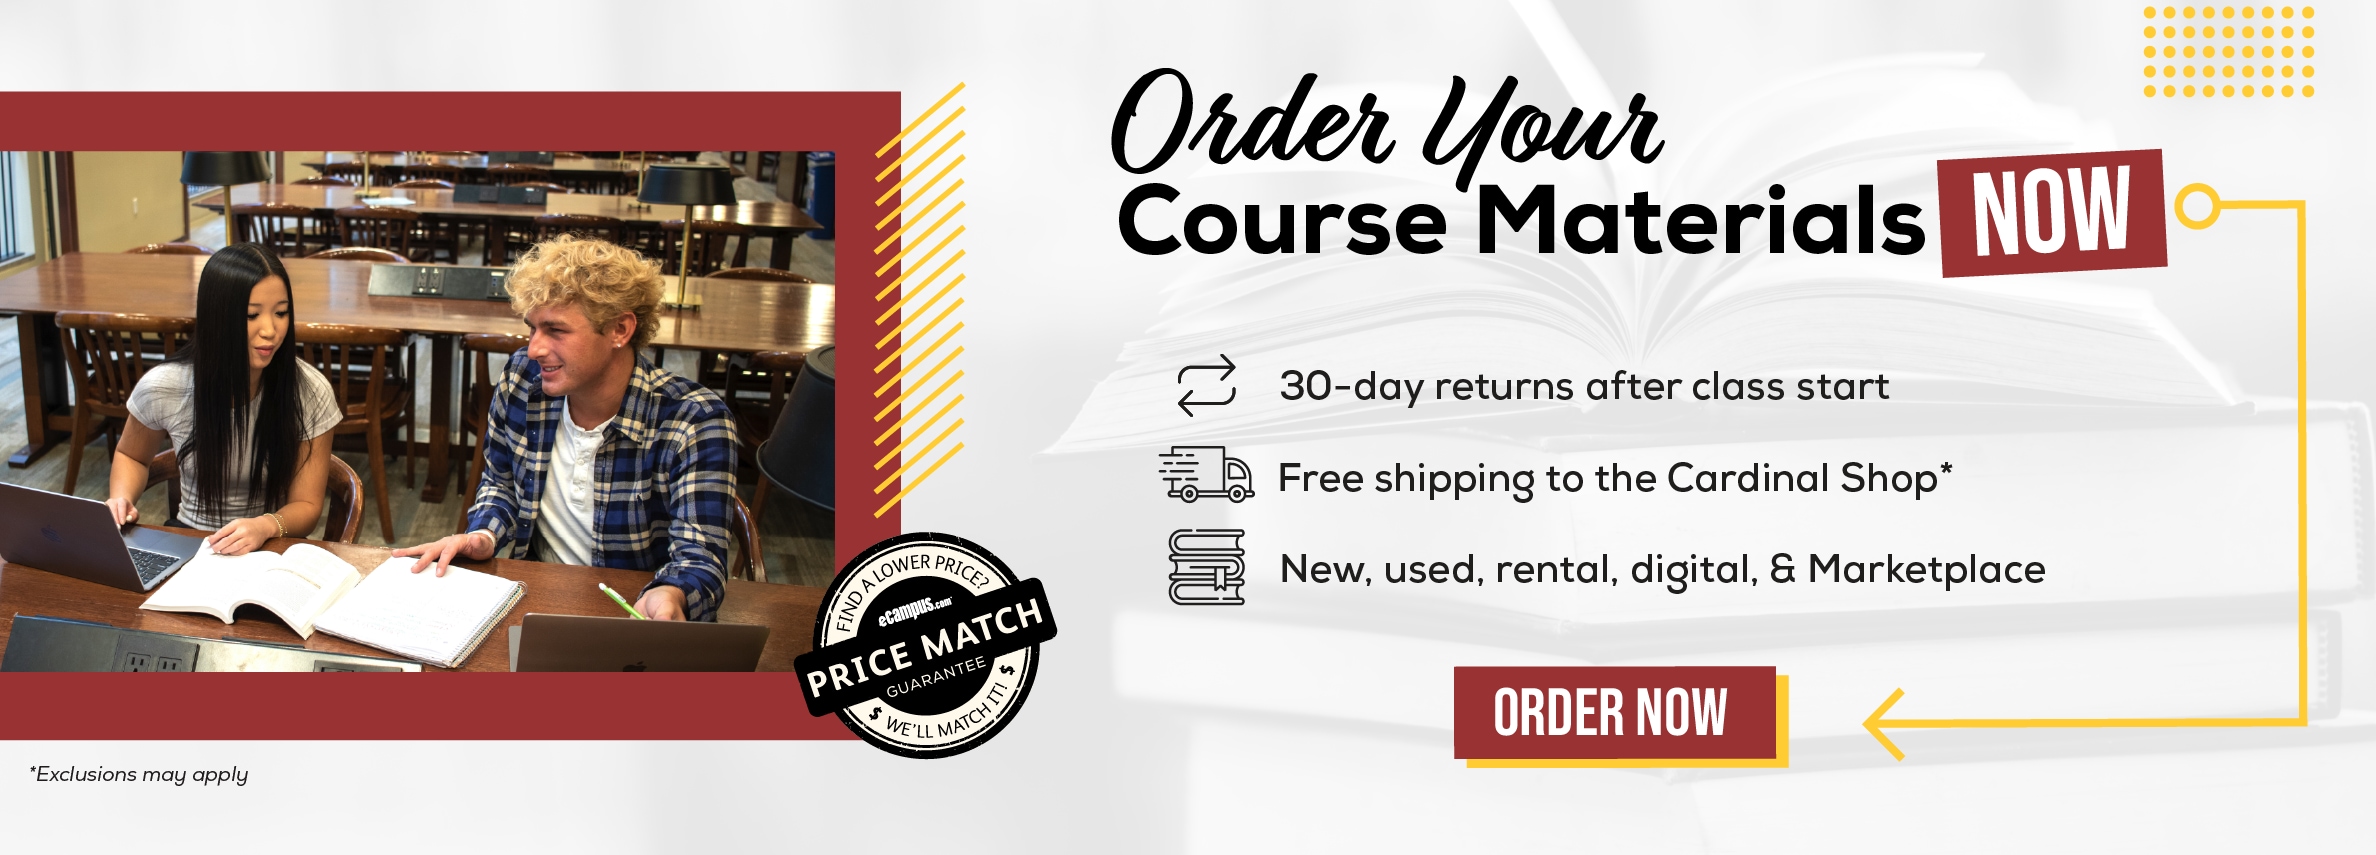 Order Your Course Materials Now. 30-day returns after class start. Free shipping to the Cardinal Shop*. New, used, rental, digital, & Marketplace. Order now. *Exclusions may apply.